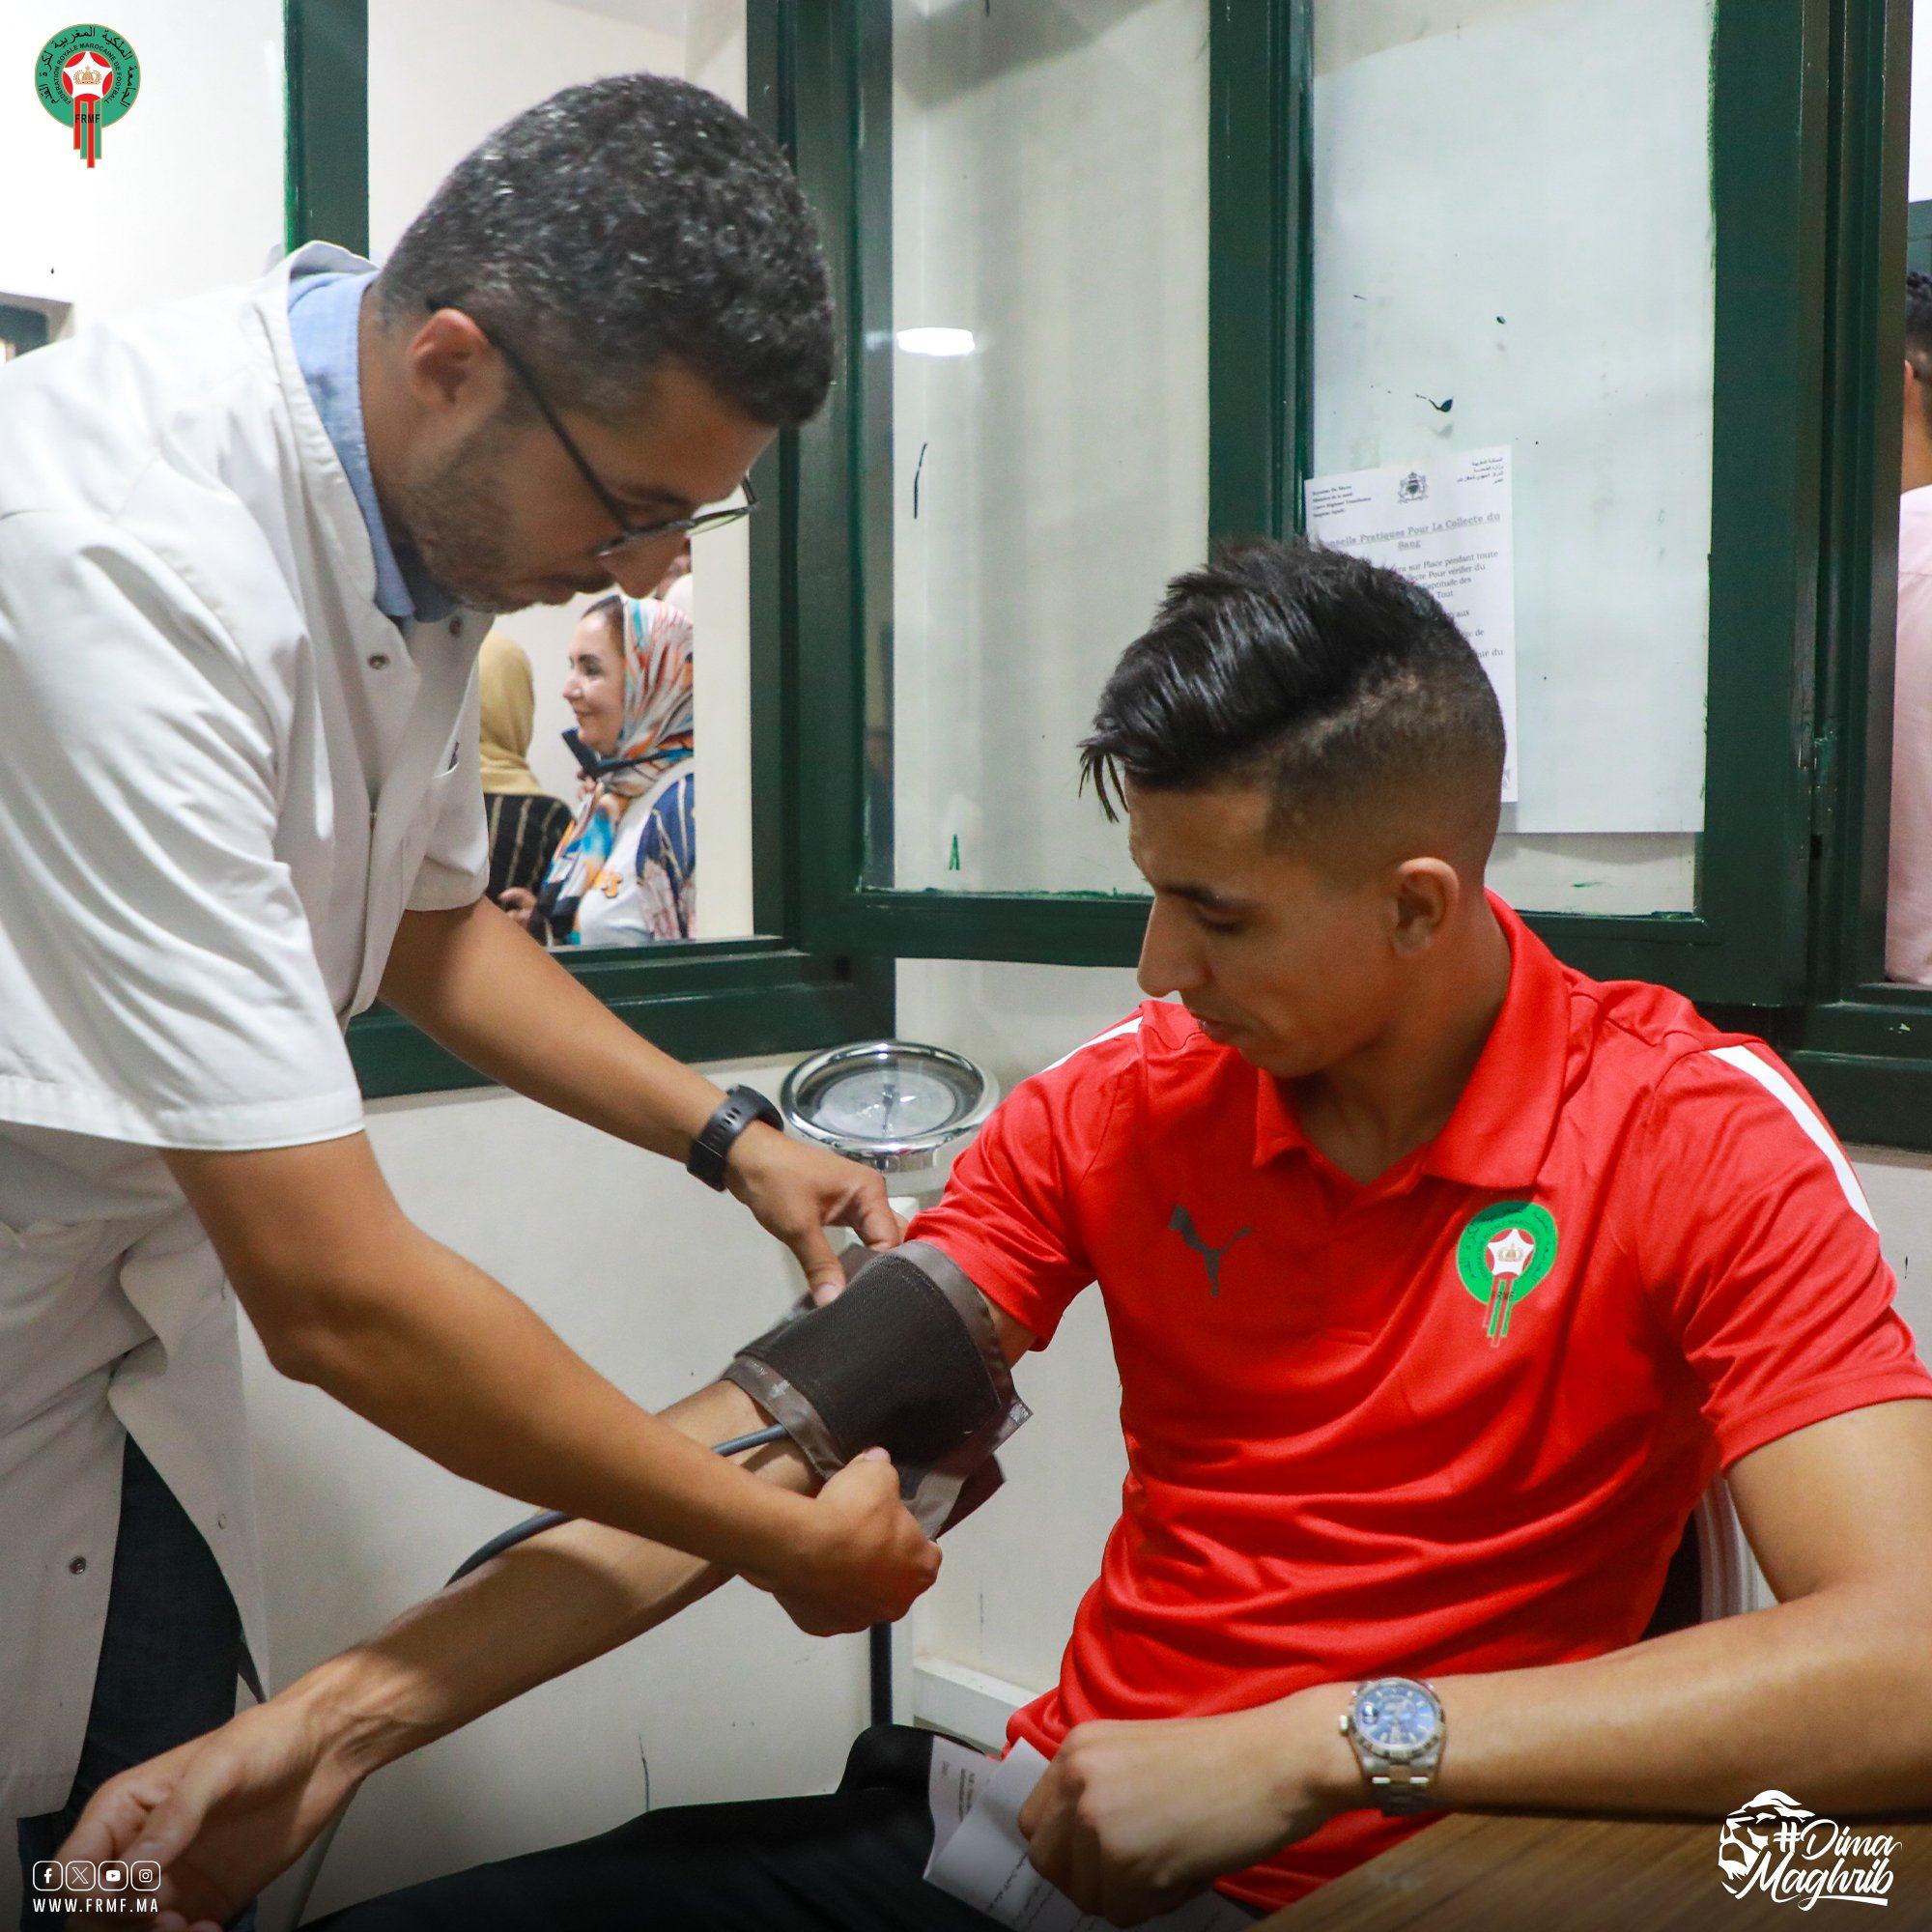 Atlas Lions donate blood to earthquake victims. Photo: Morocco national team